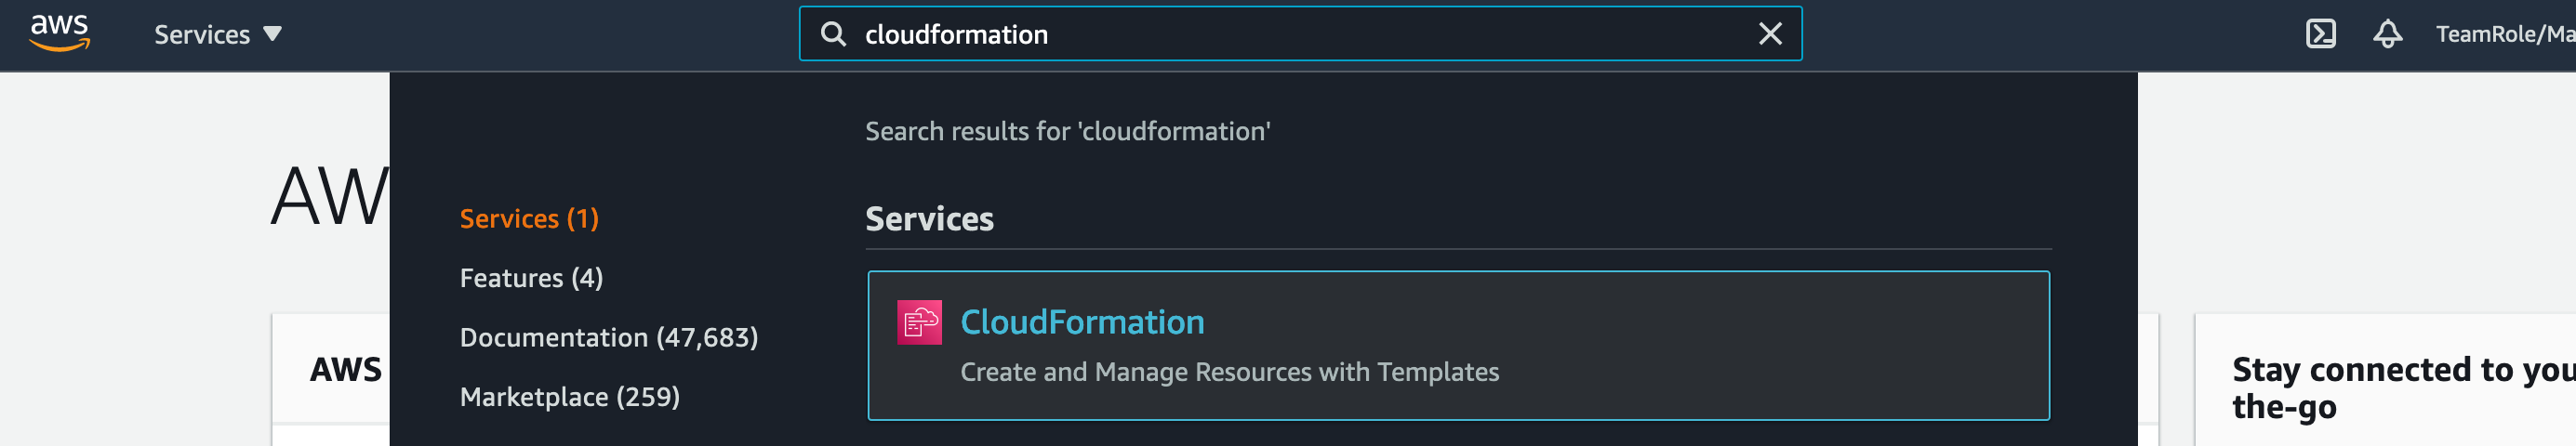 AWS Console Screenshot: Search for CloudFormation